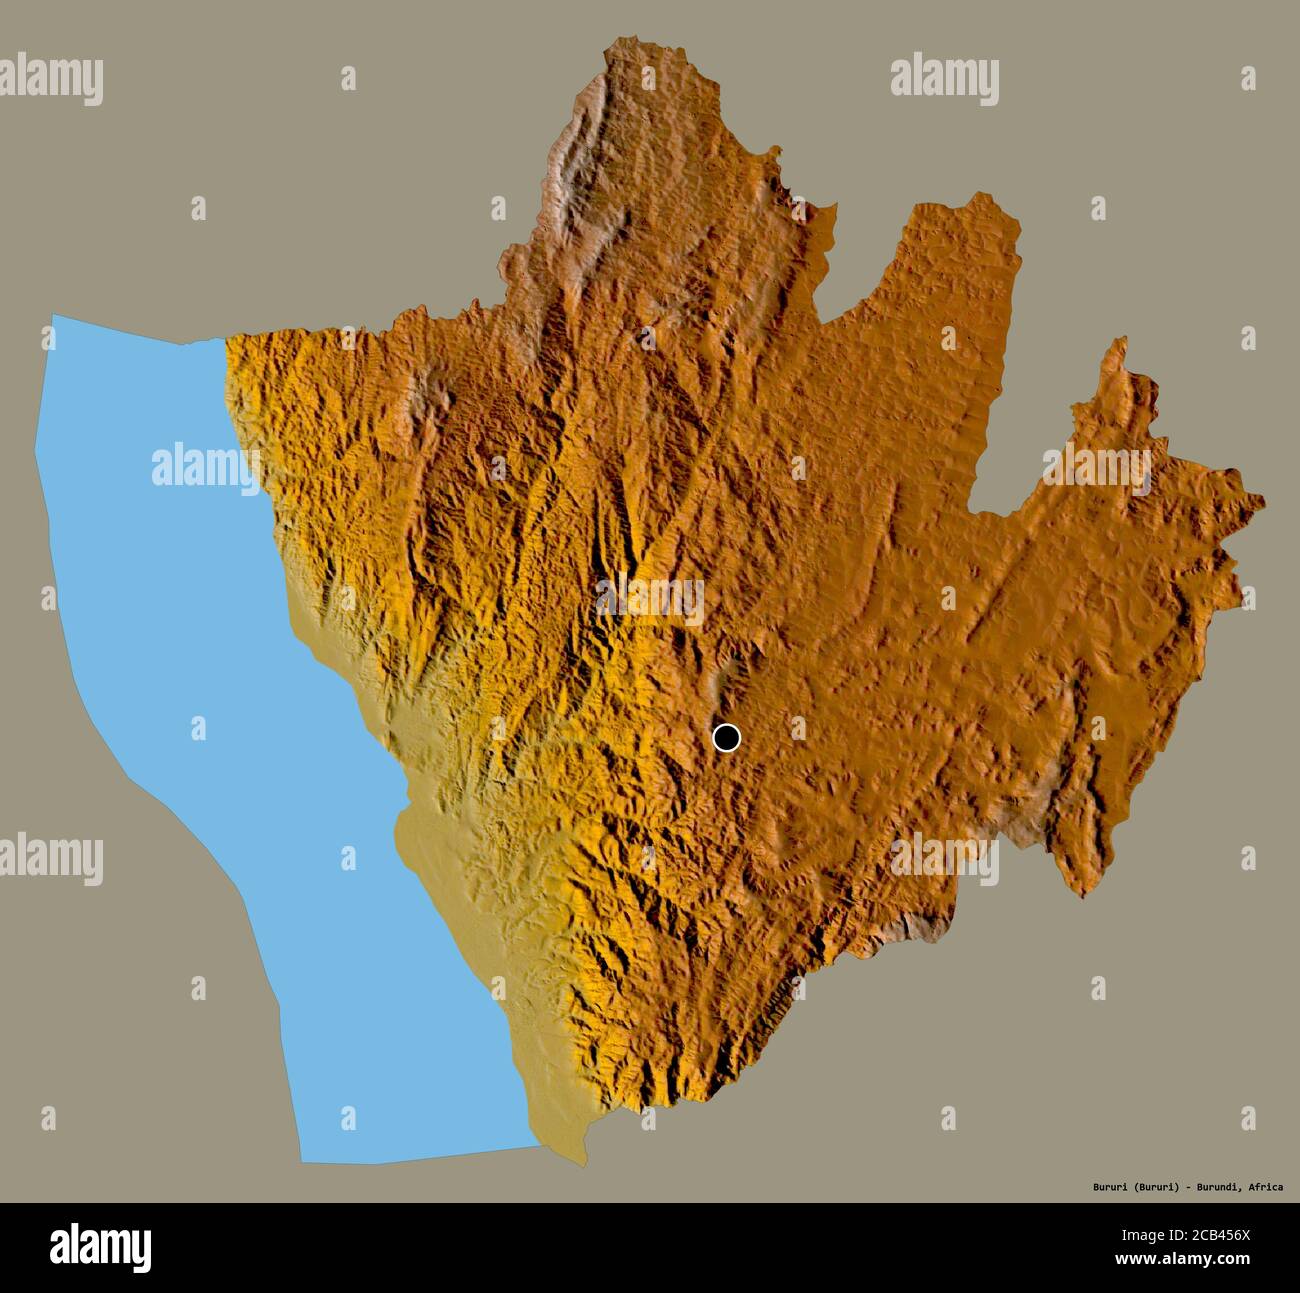 Shape of Bururi, province of Burundi, with its capital isolated on a solid color background. Topographic relief map. 3D rendering Stock Photo